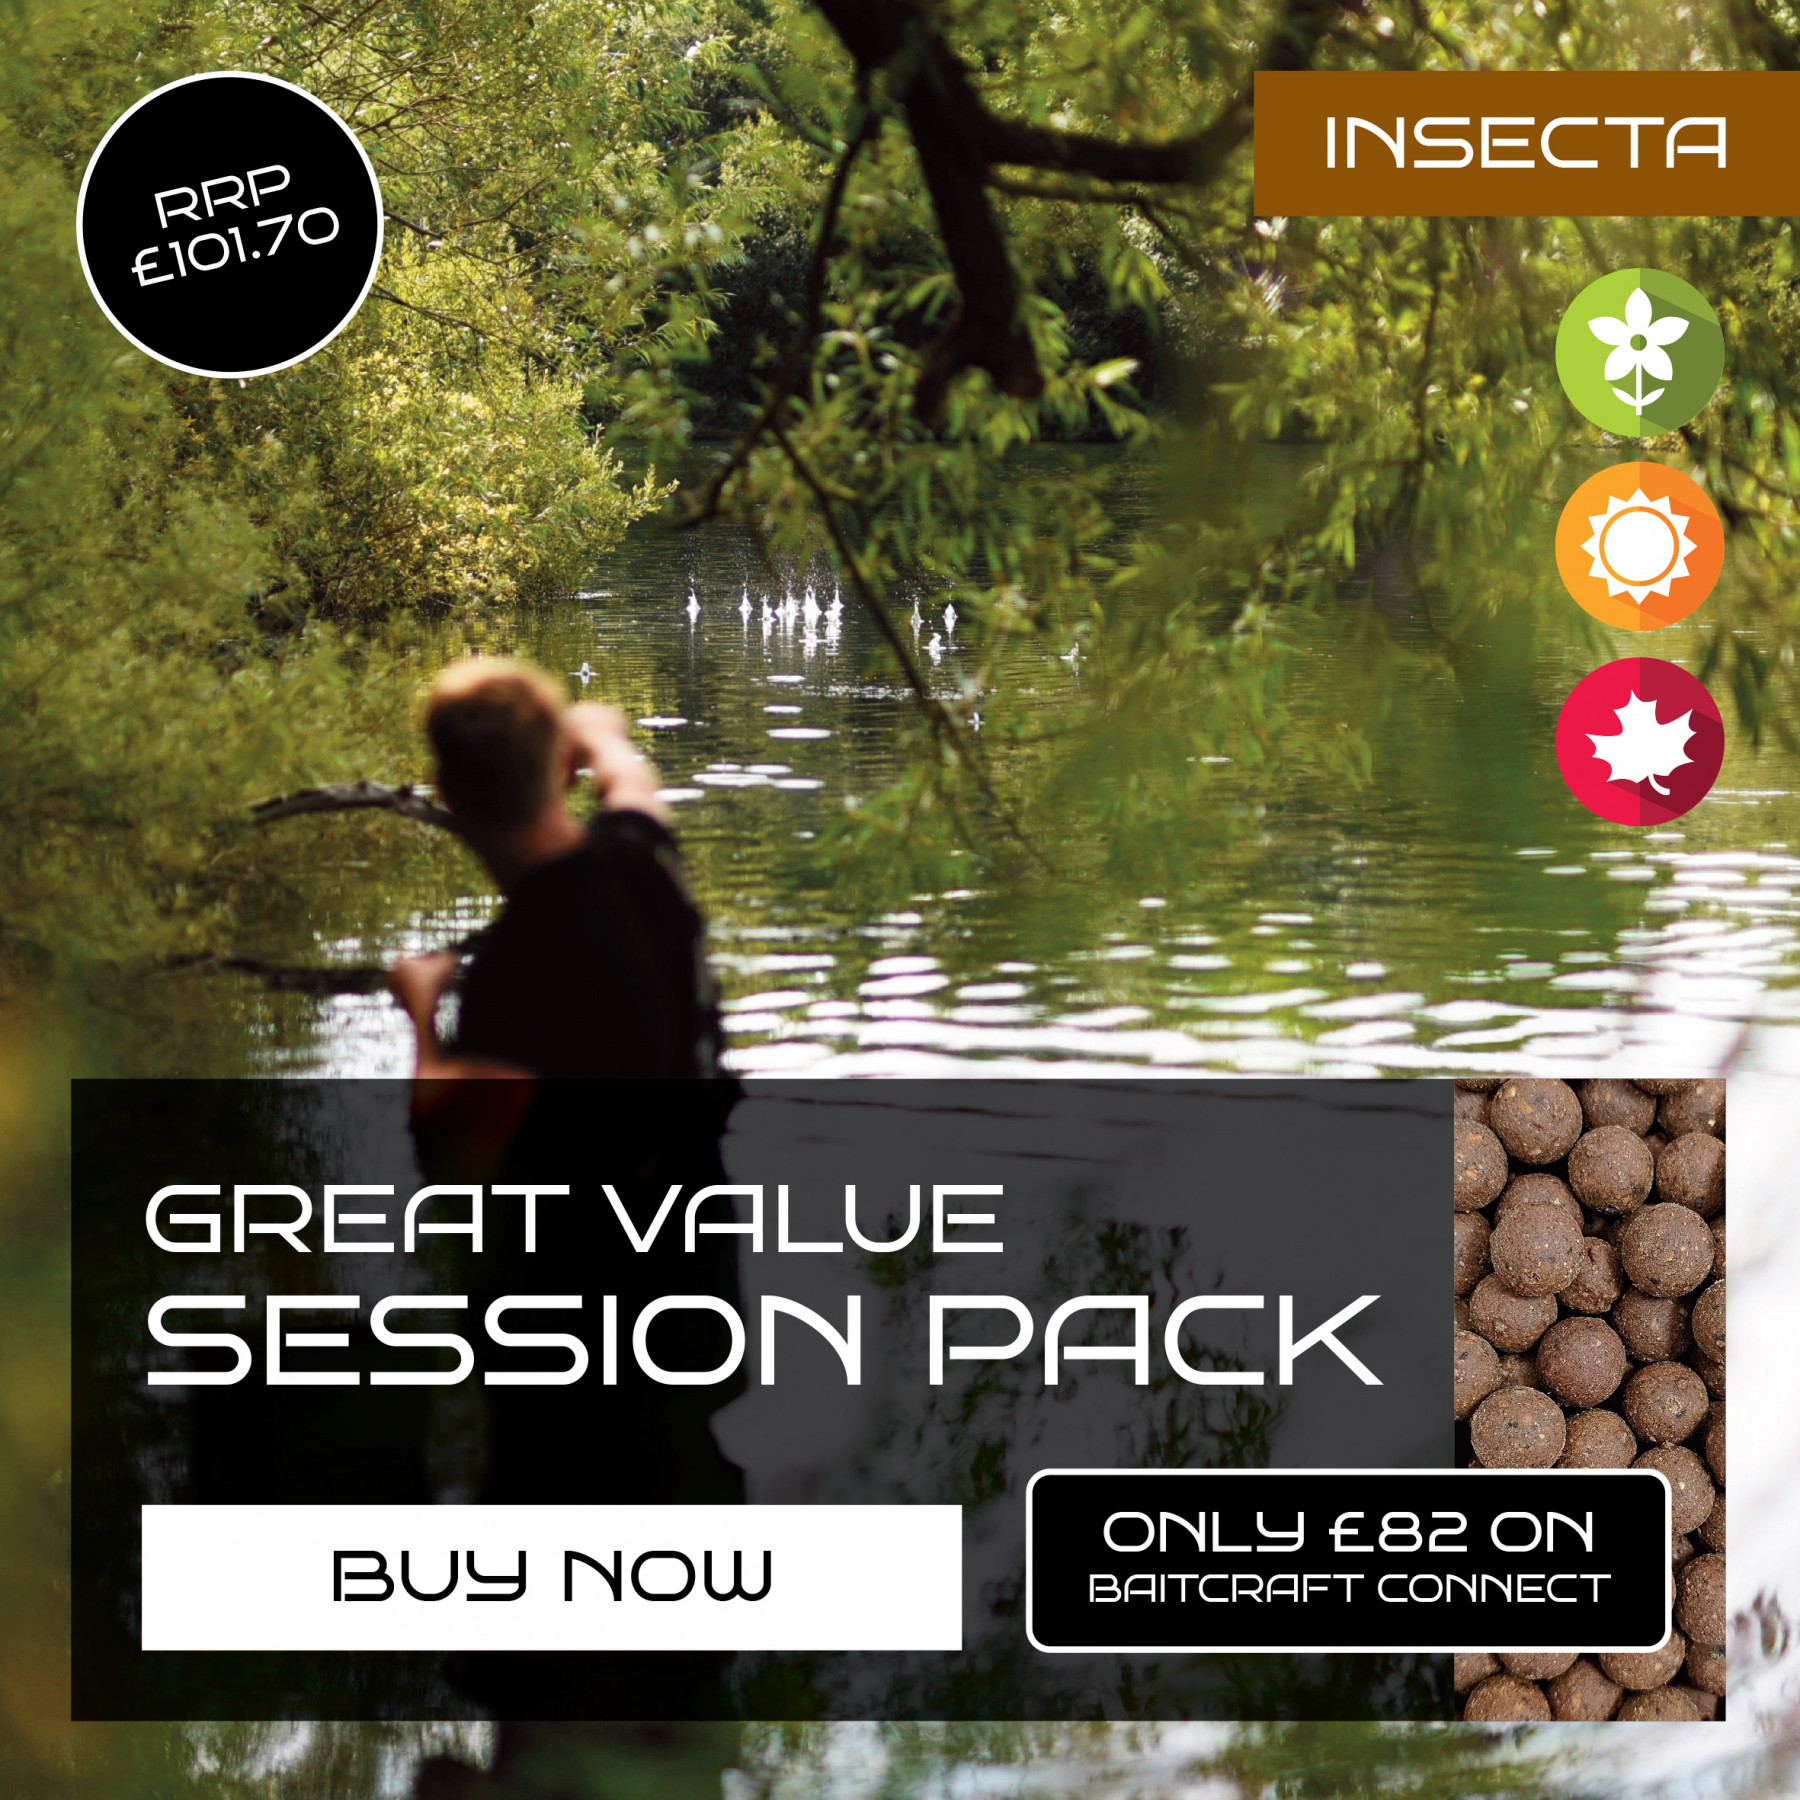 INSECTA SESSION PACK